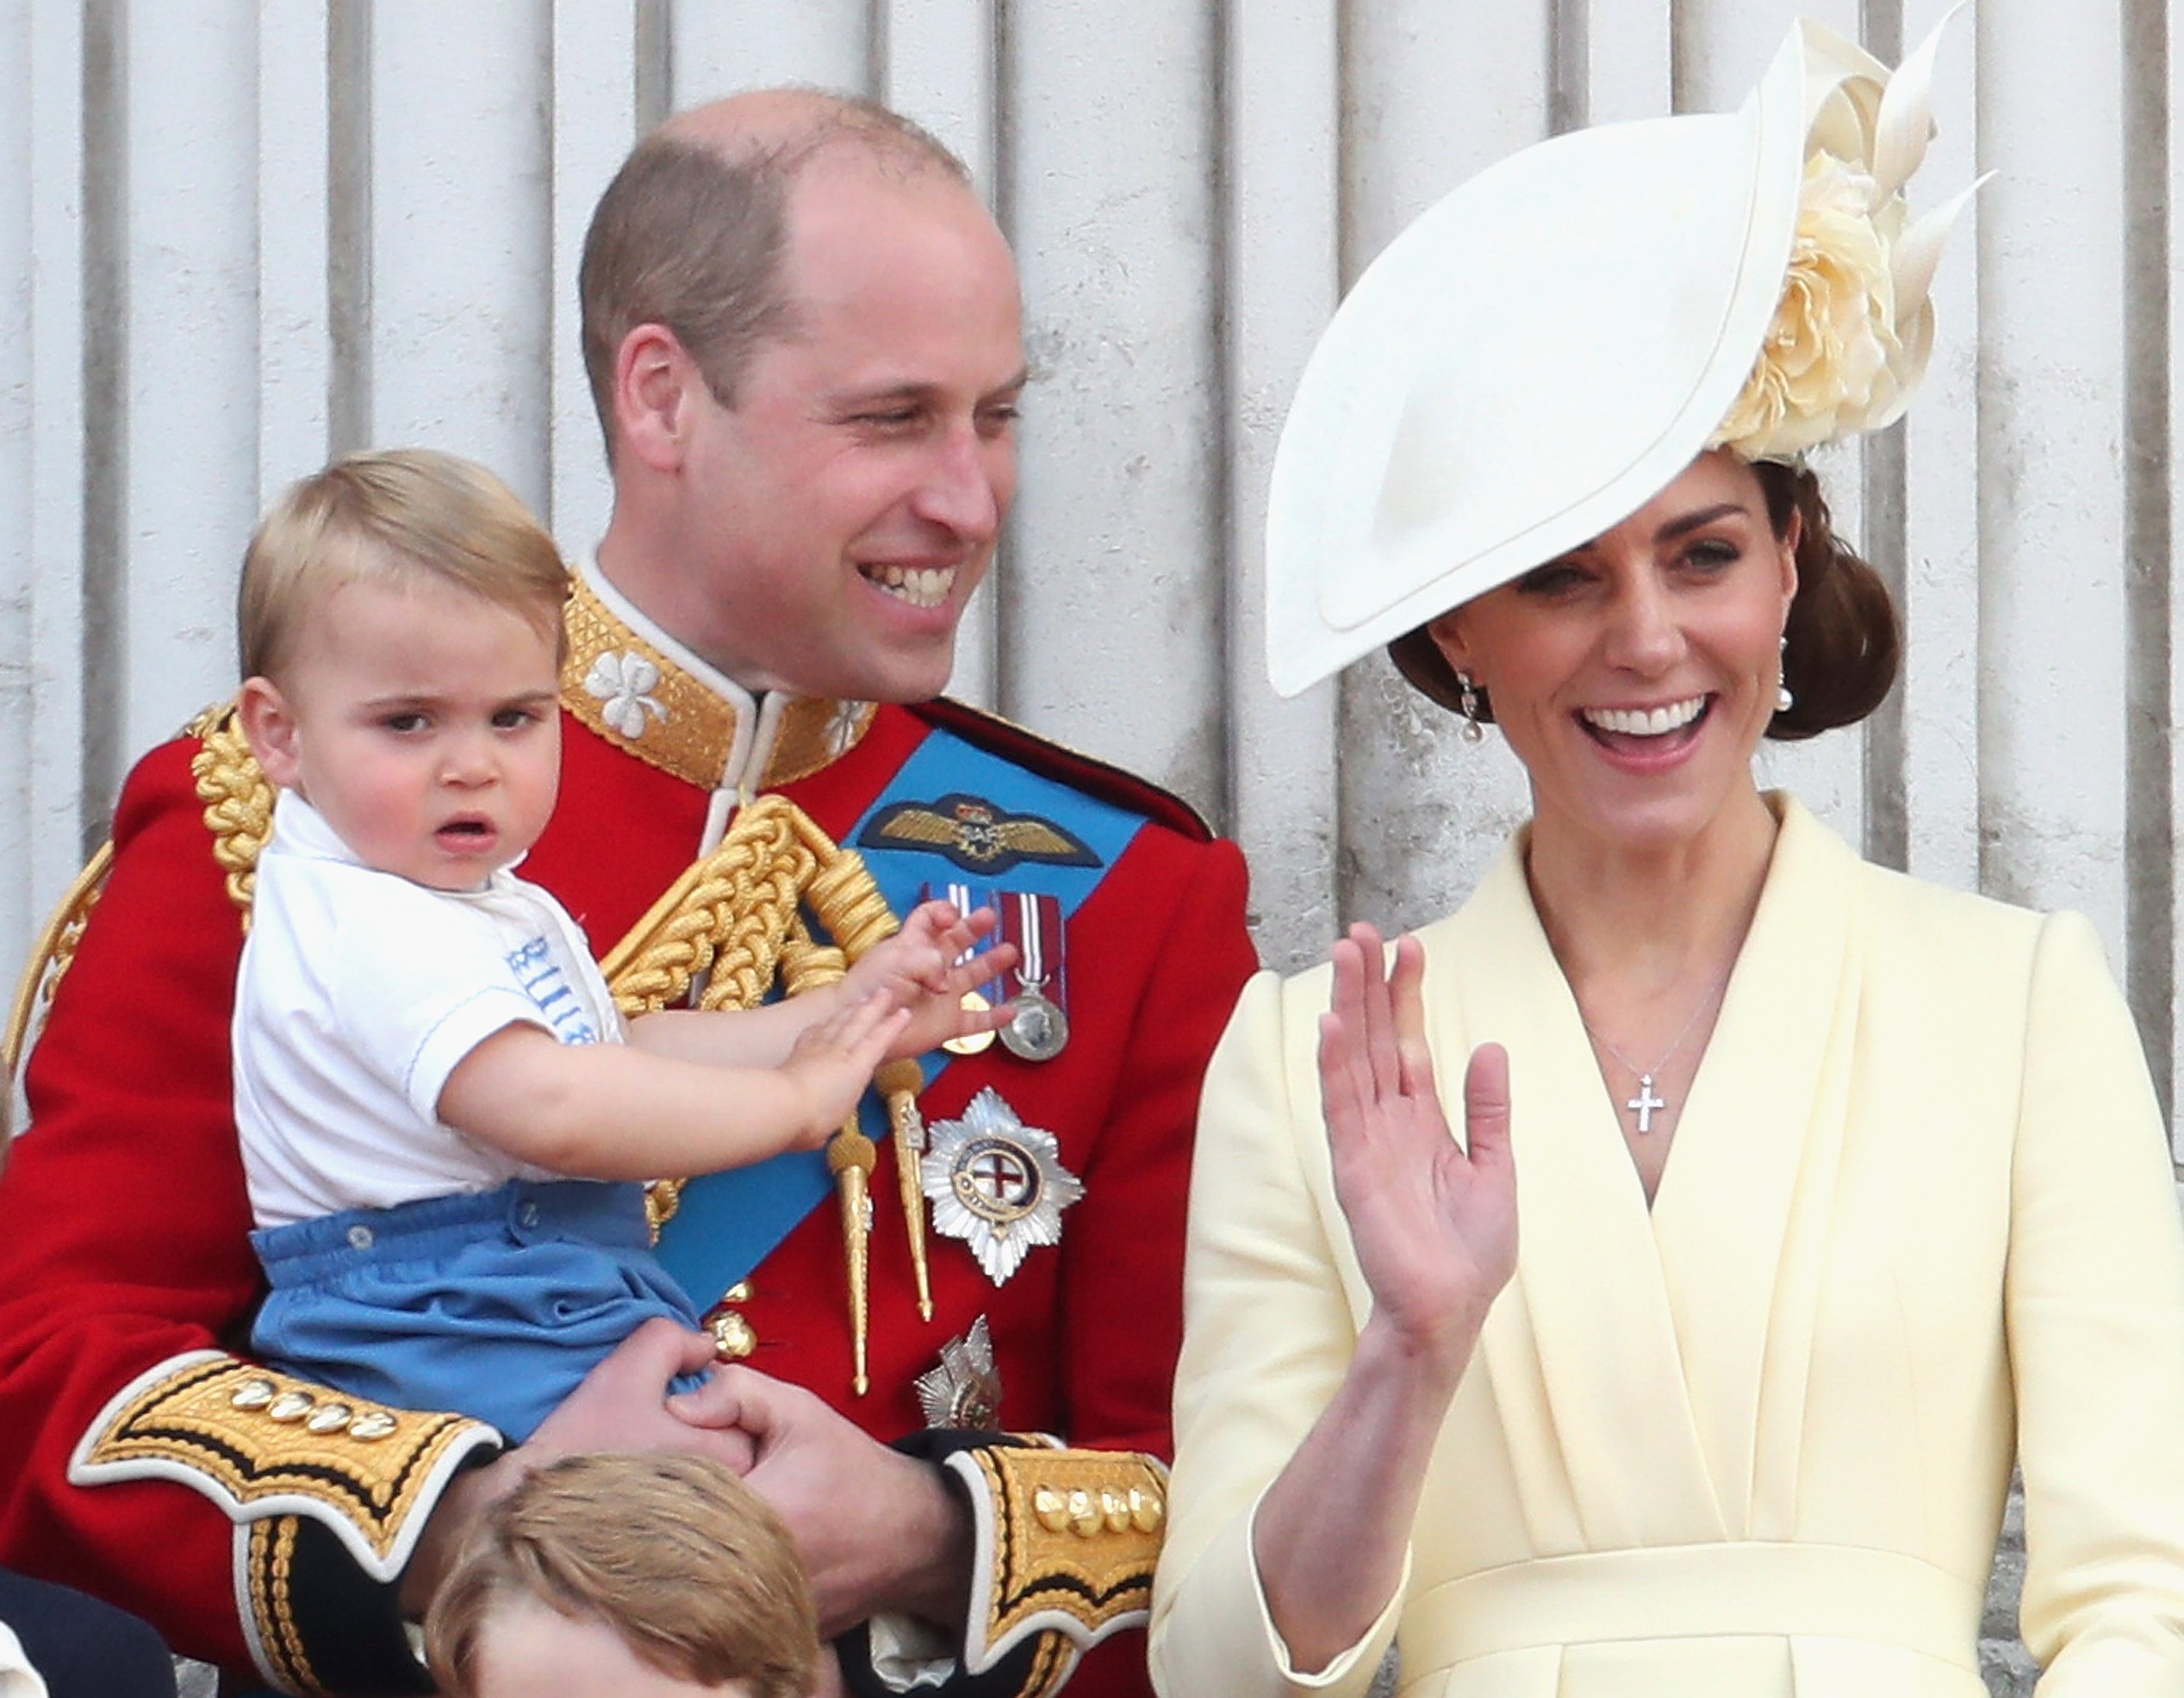 Prince Louis pictured with his father, Prince William and his mother, Kate middleton, at Trooping The Colour, the Queen's annual birthday parade, 2019, London, England. | Photo: Getty Images